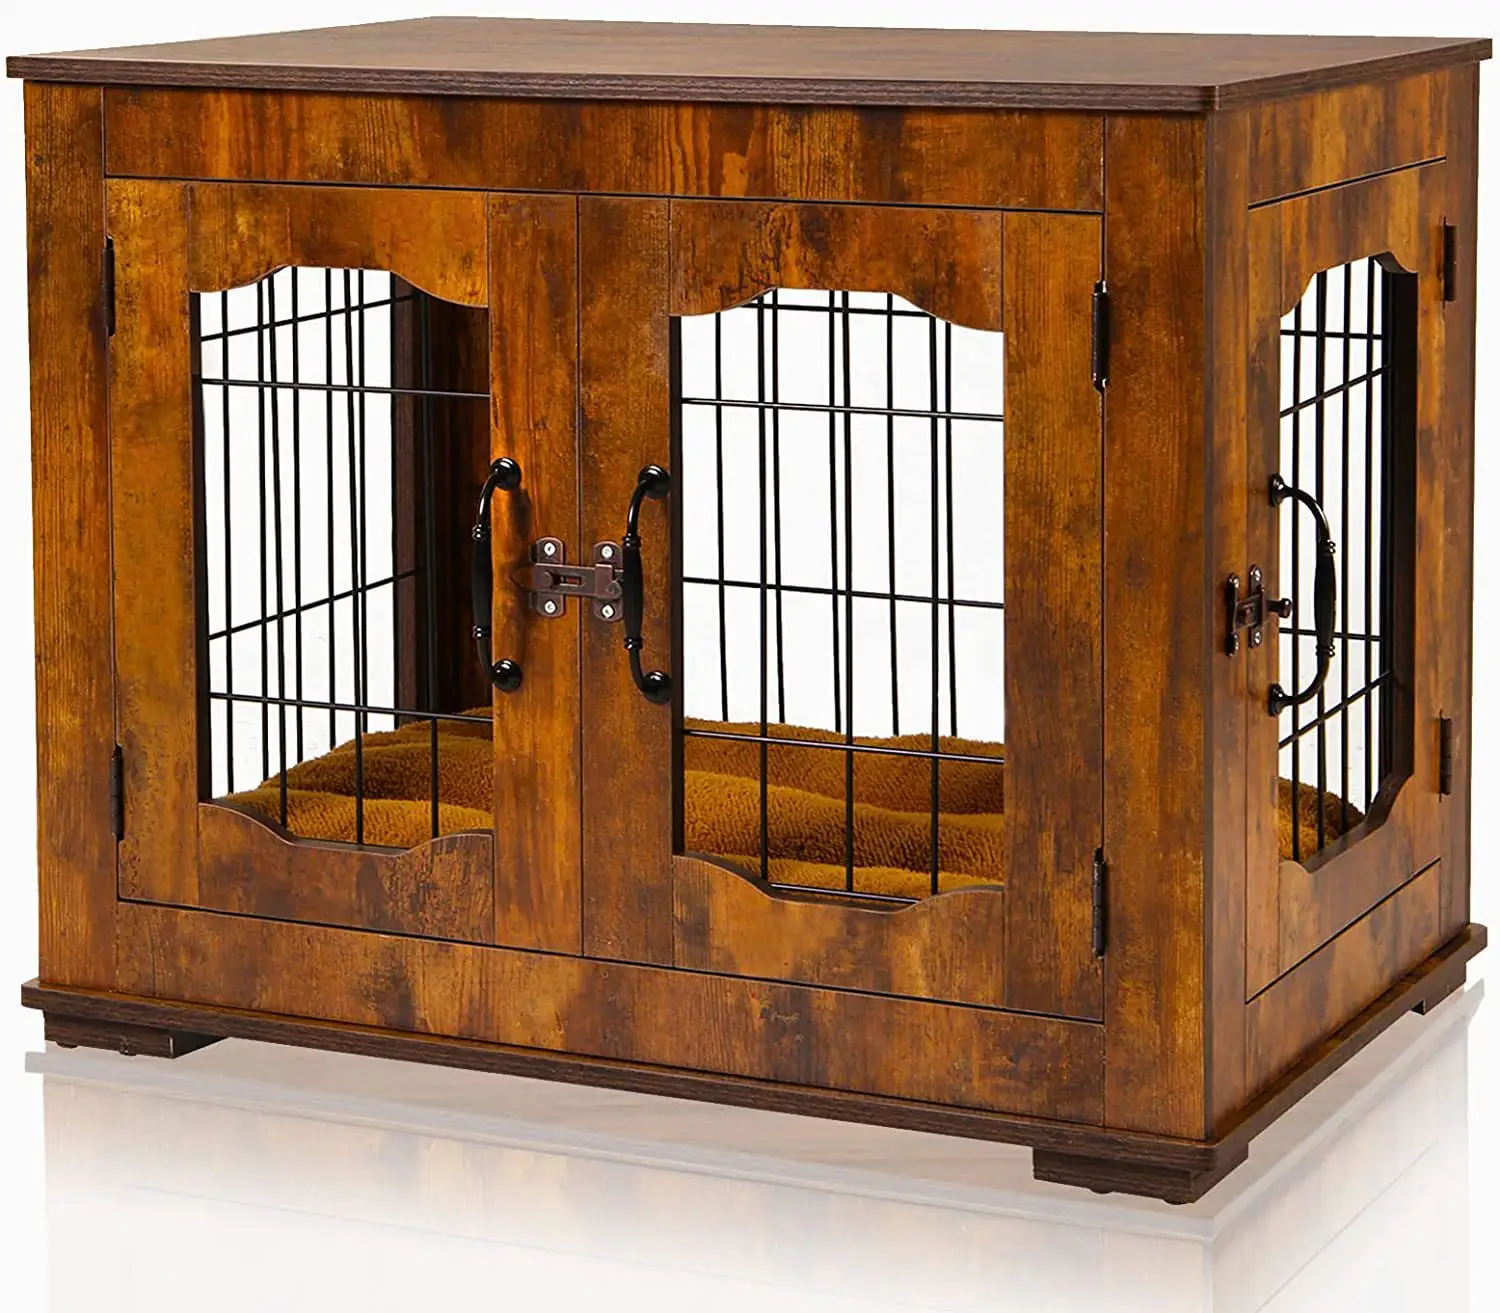 Wooden kennel with two end table kennel for small/medium sized dogs